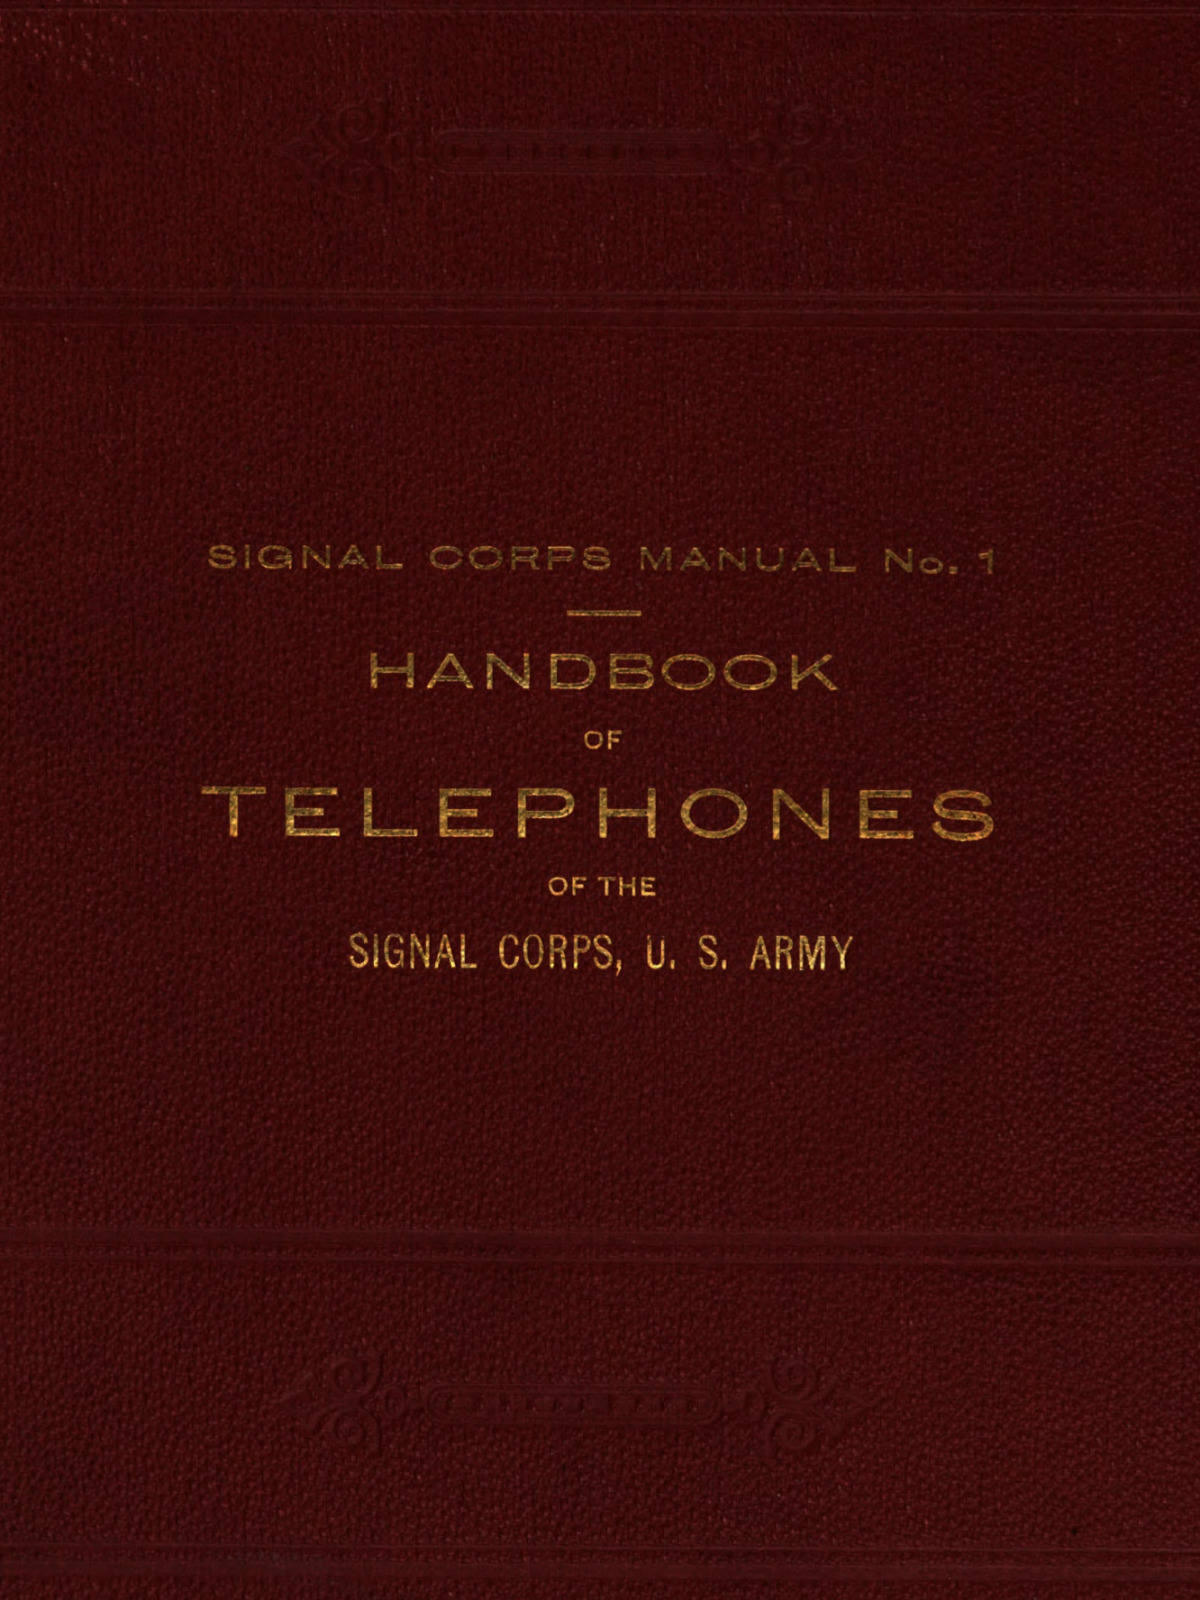 76 Page 1904 Signal Corps Manual No 1 Handbook Of Telephones on CD